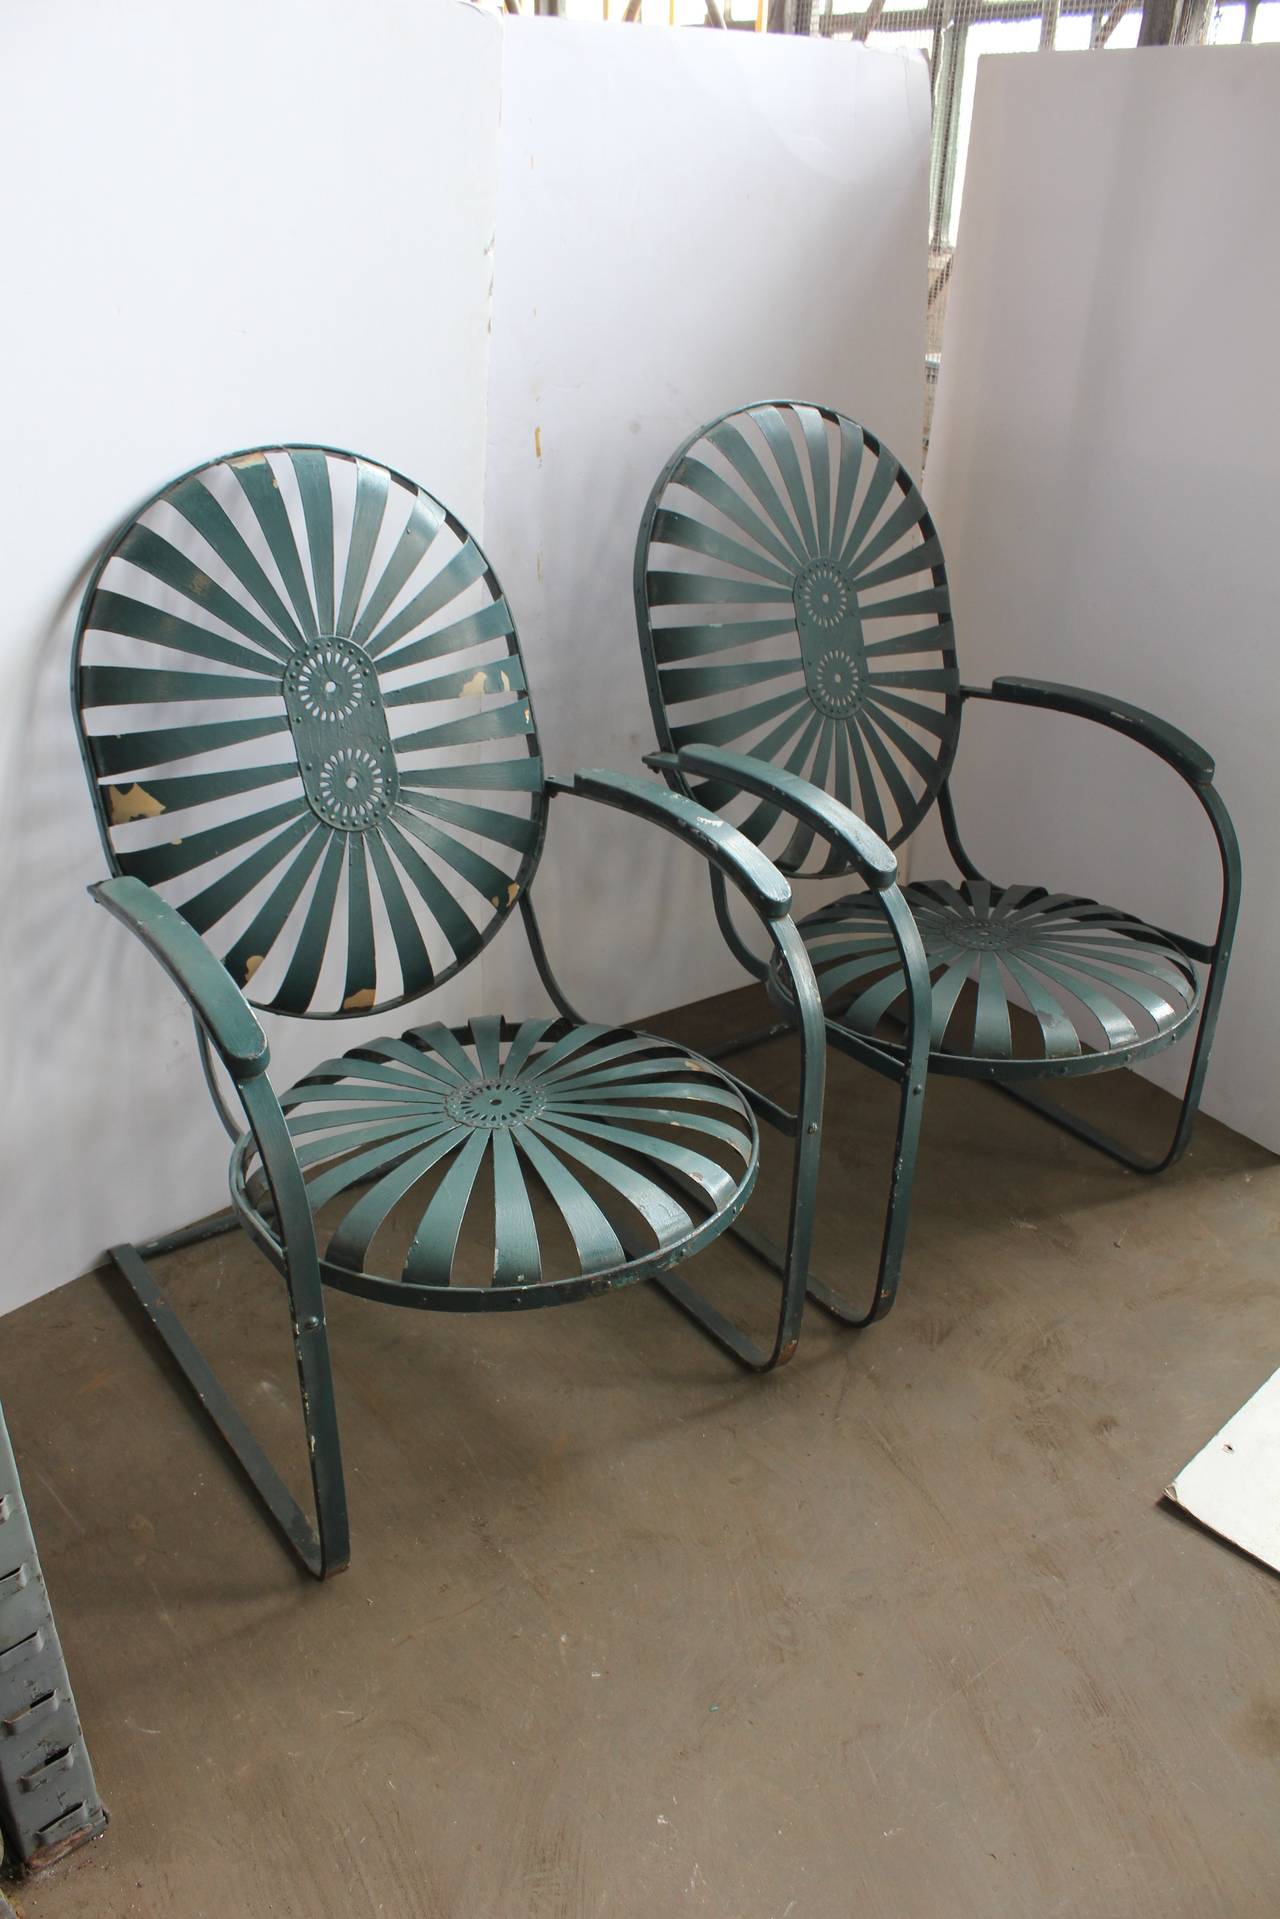 Rare 1930's French metal garden lounge chairs by Carre.